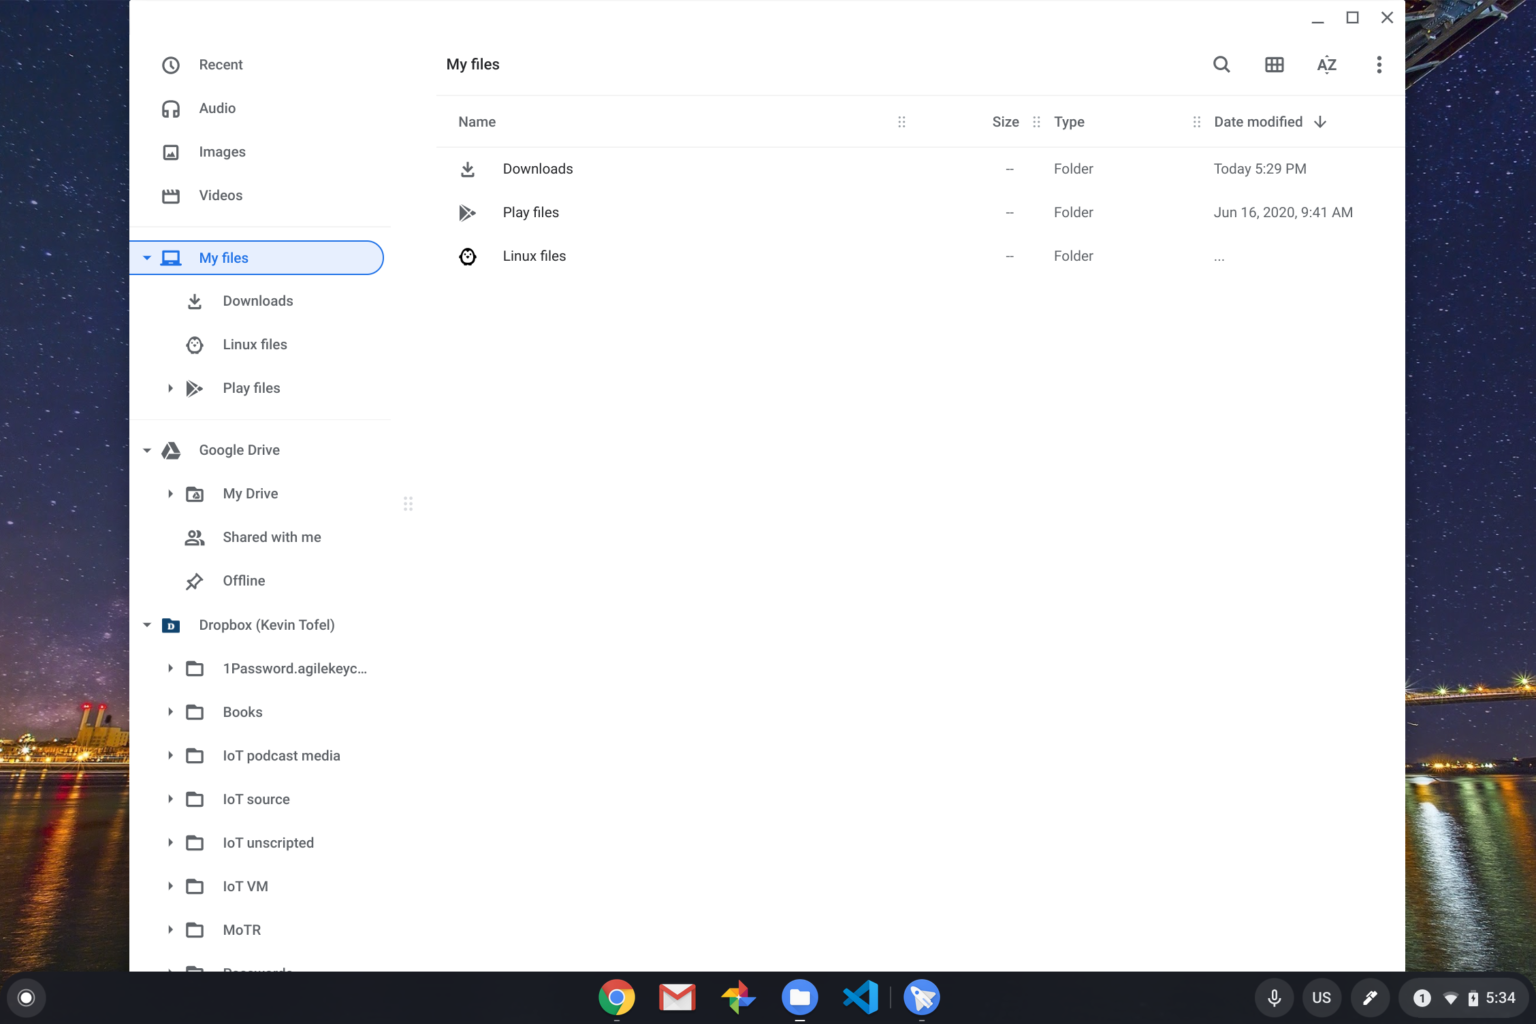 Dropbox 176.4.5108 instal the new version for windows